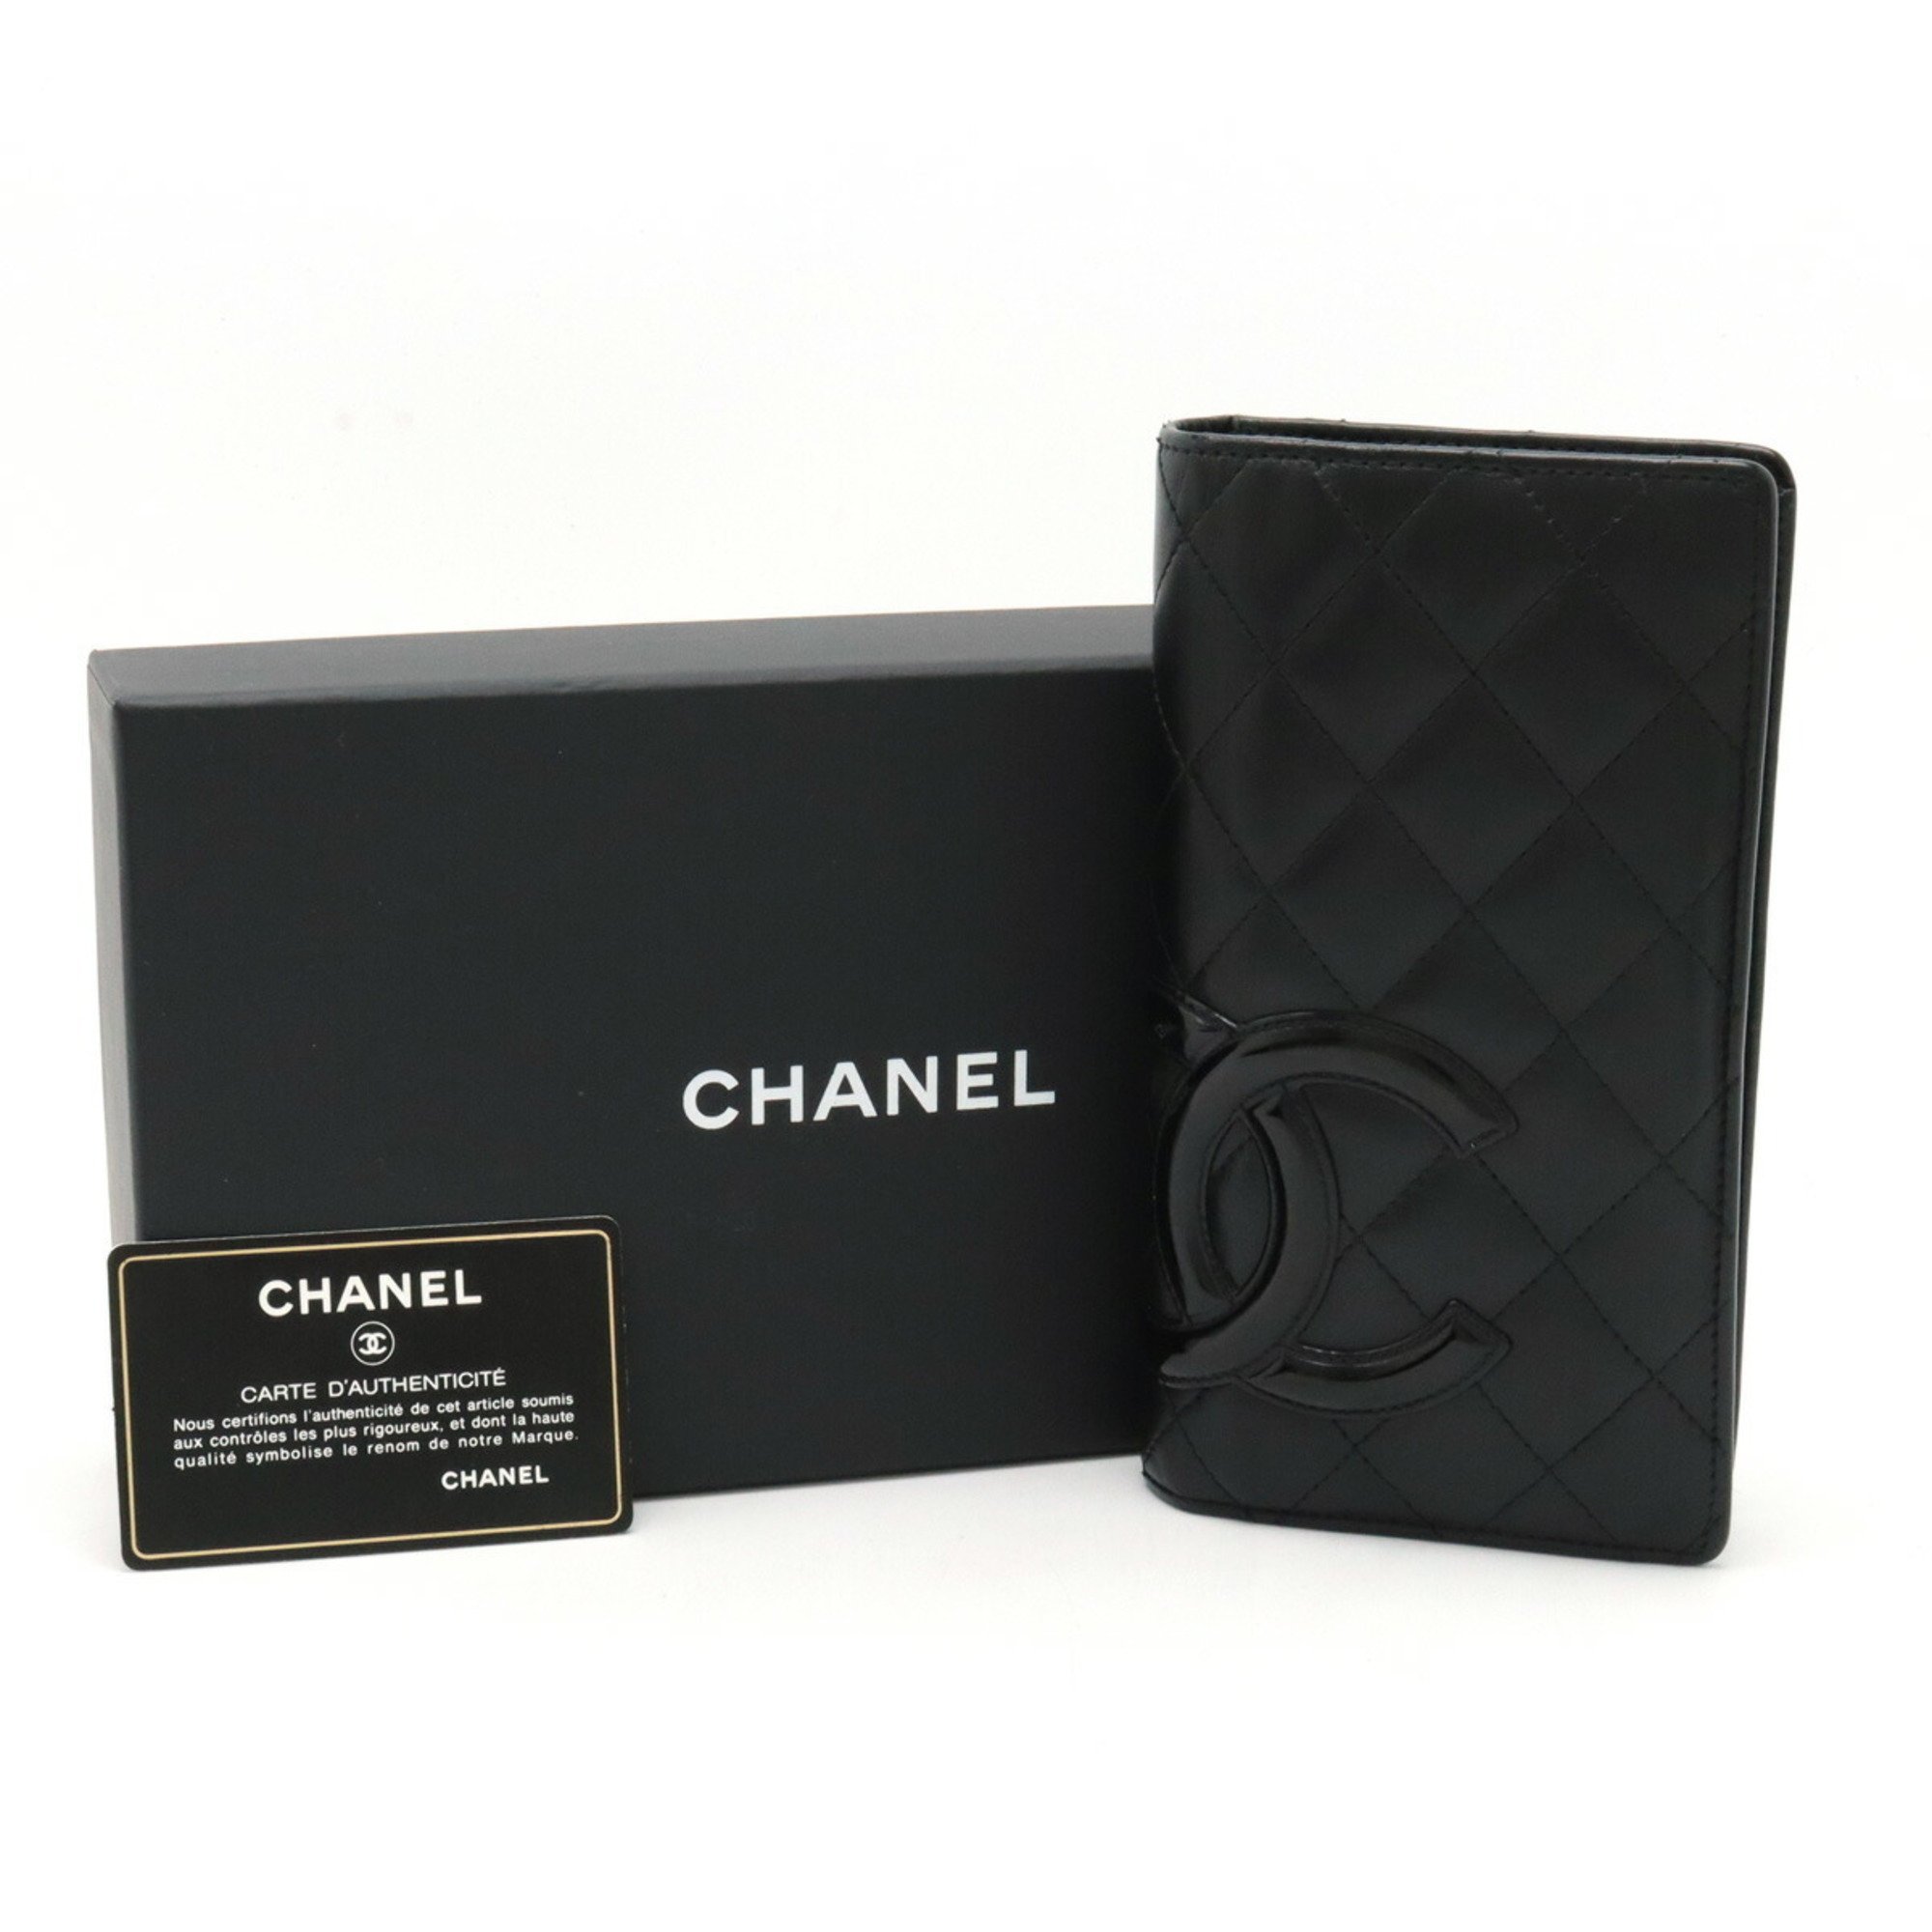 CHANEL Cambon Line Coco Mark Bi-fold Long Wallet Leather Soft Calfskin Patent Black A26717